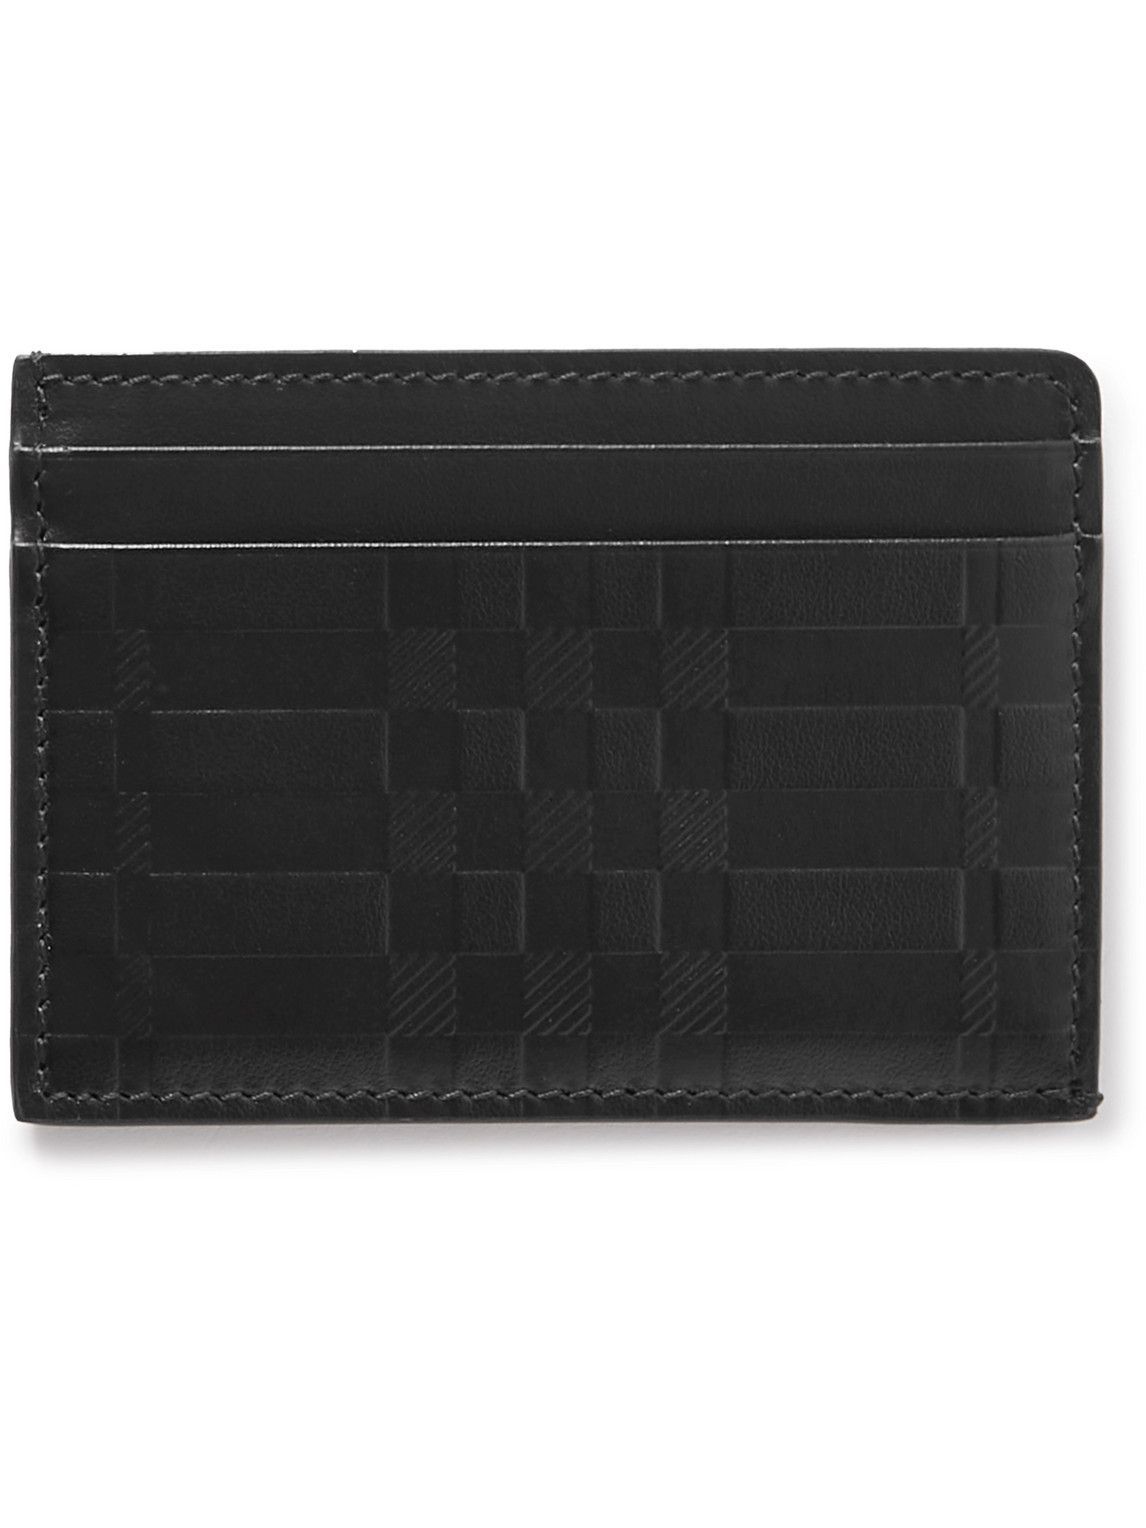 Photo: Burberry - Embossed Leather Cardholder